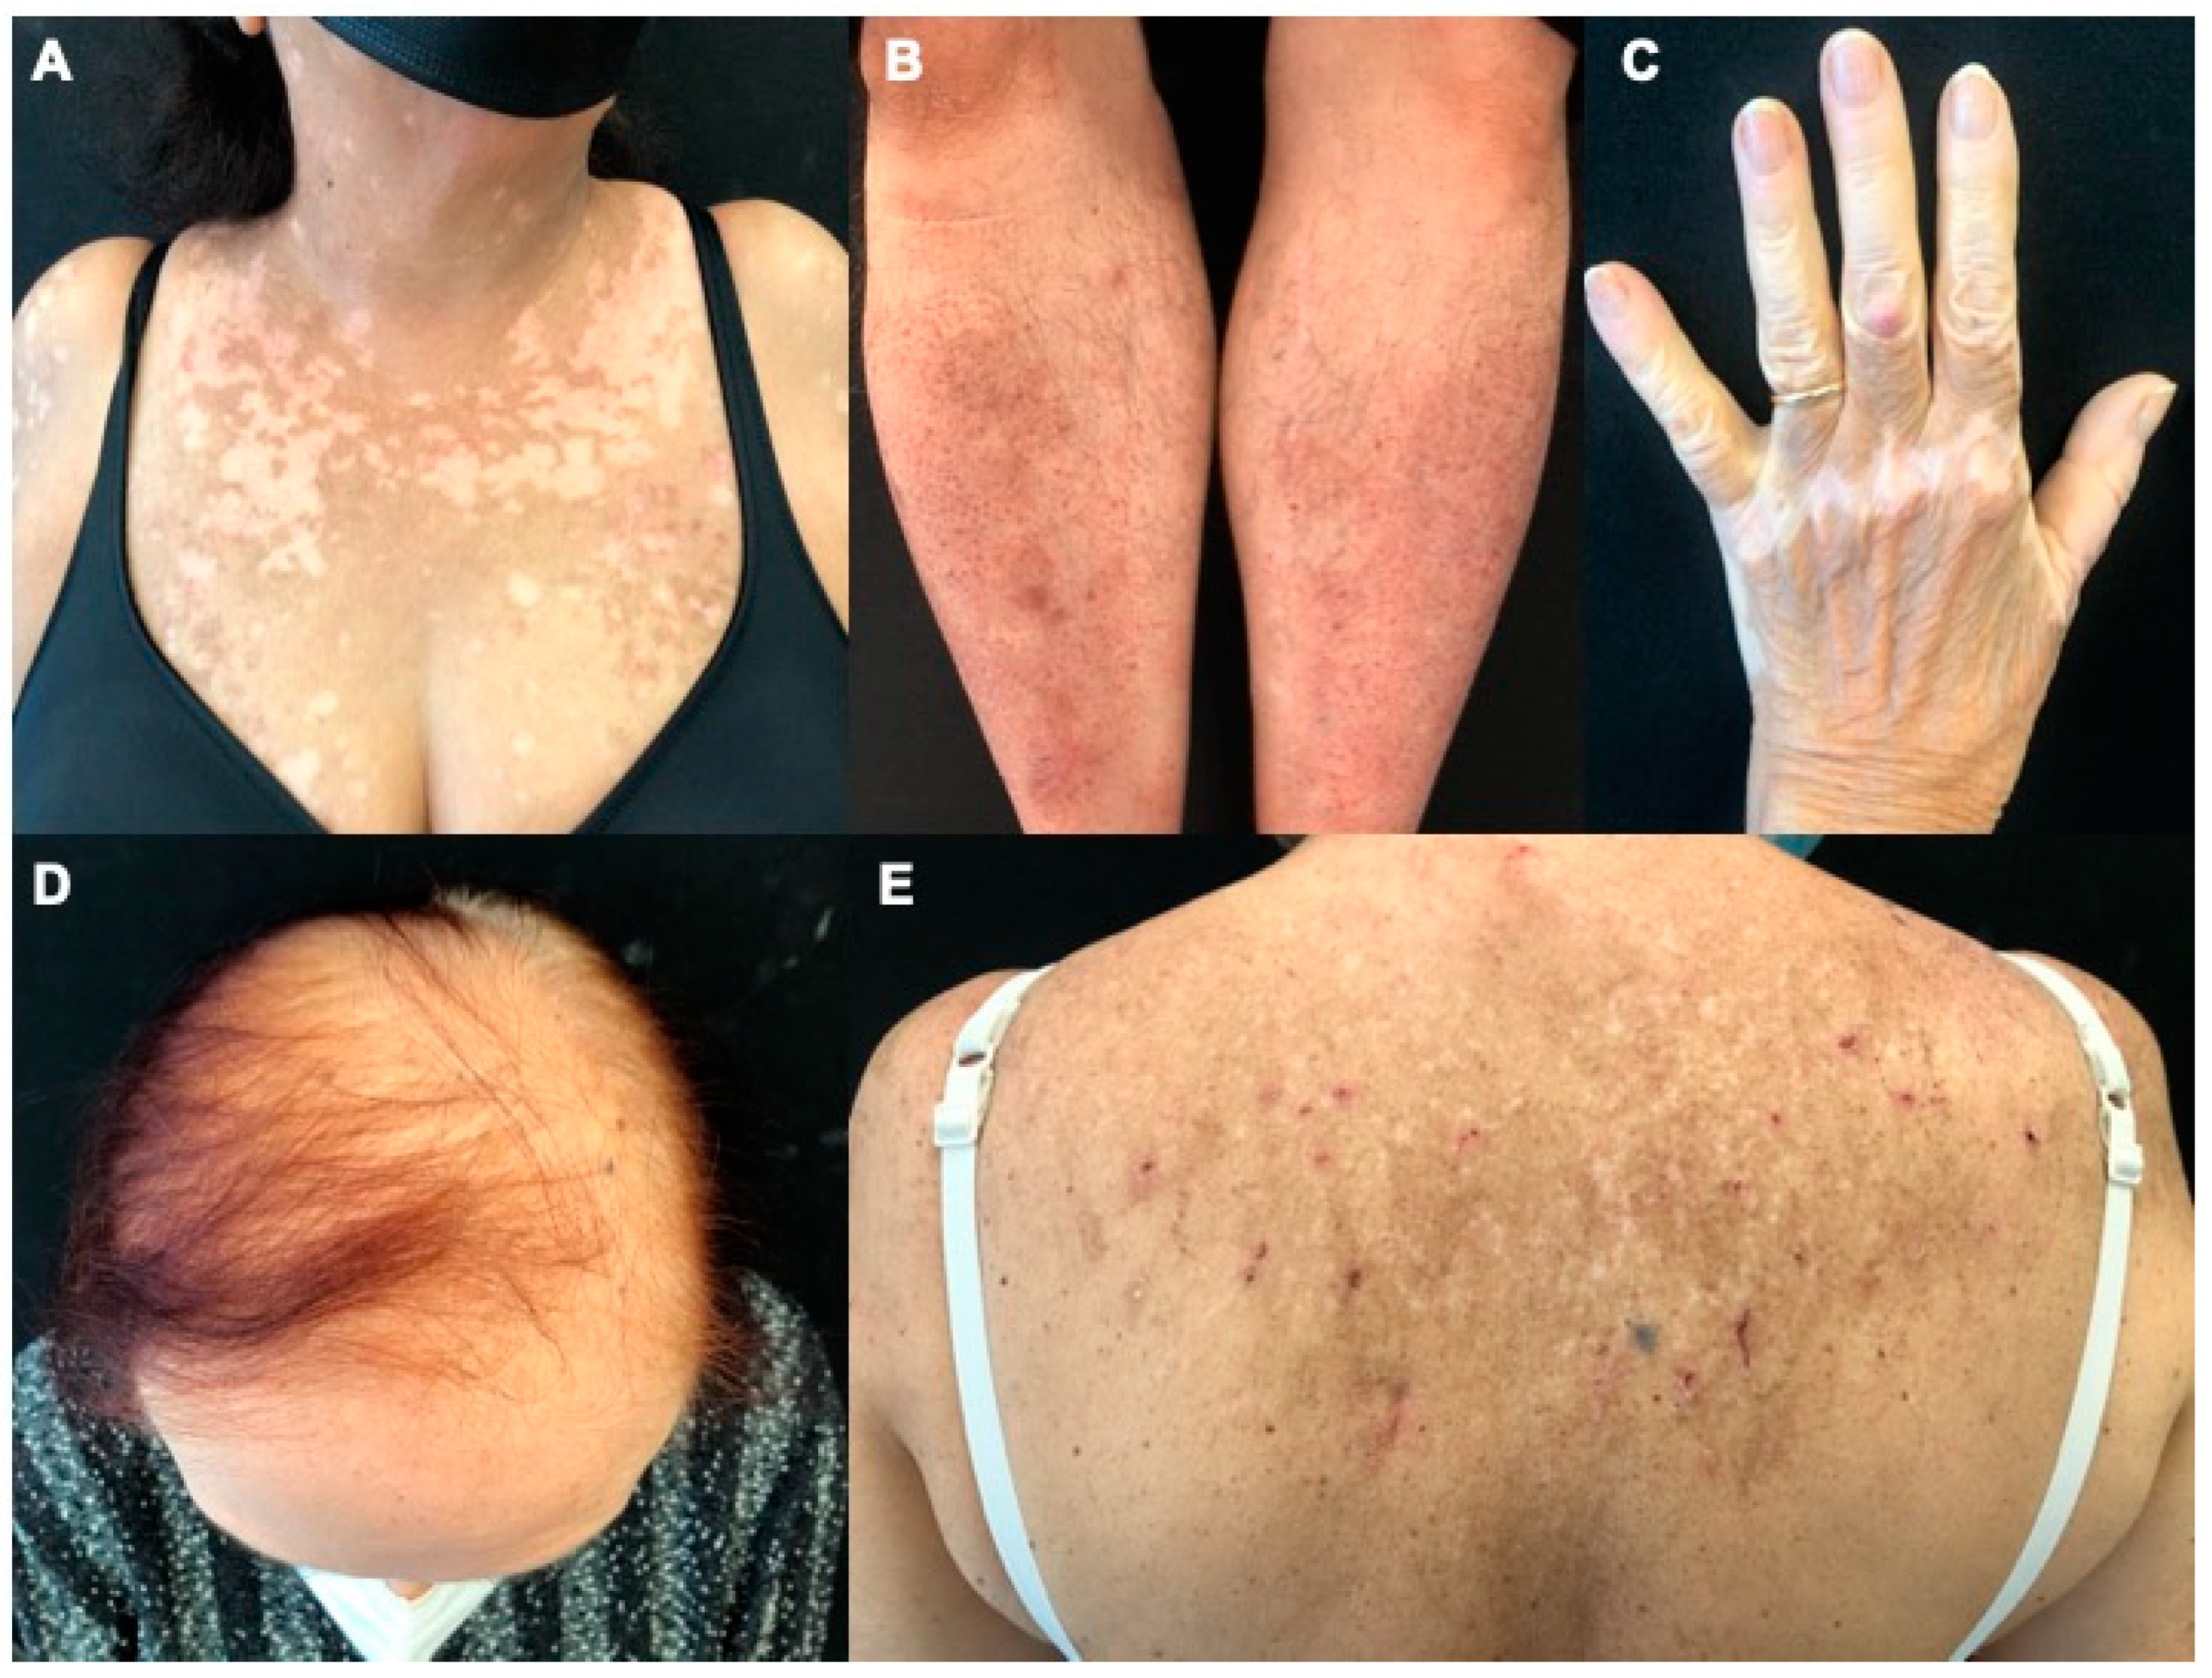 Clinical Challenge: Patchy Rash on Chest - MPR